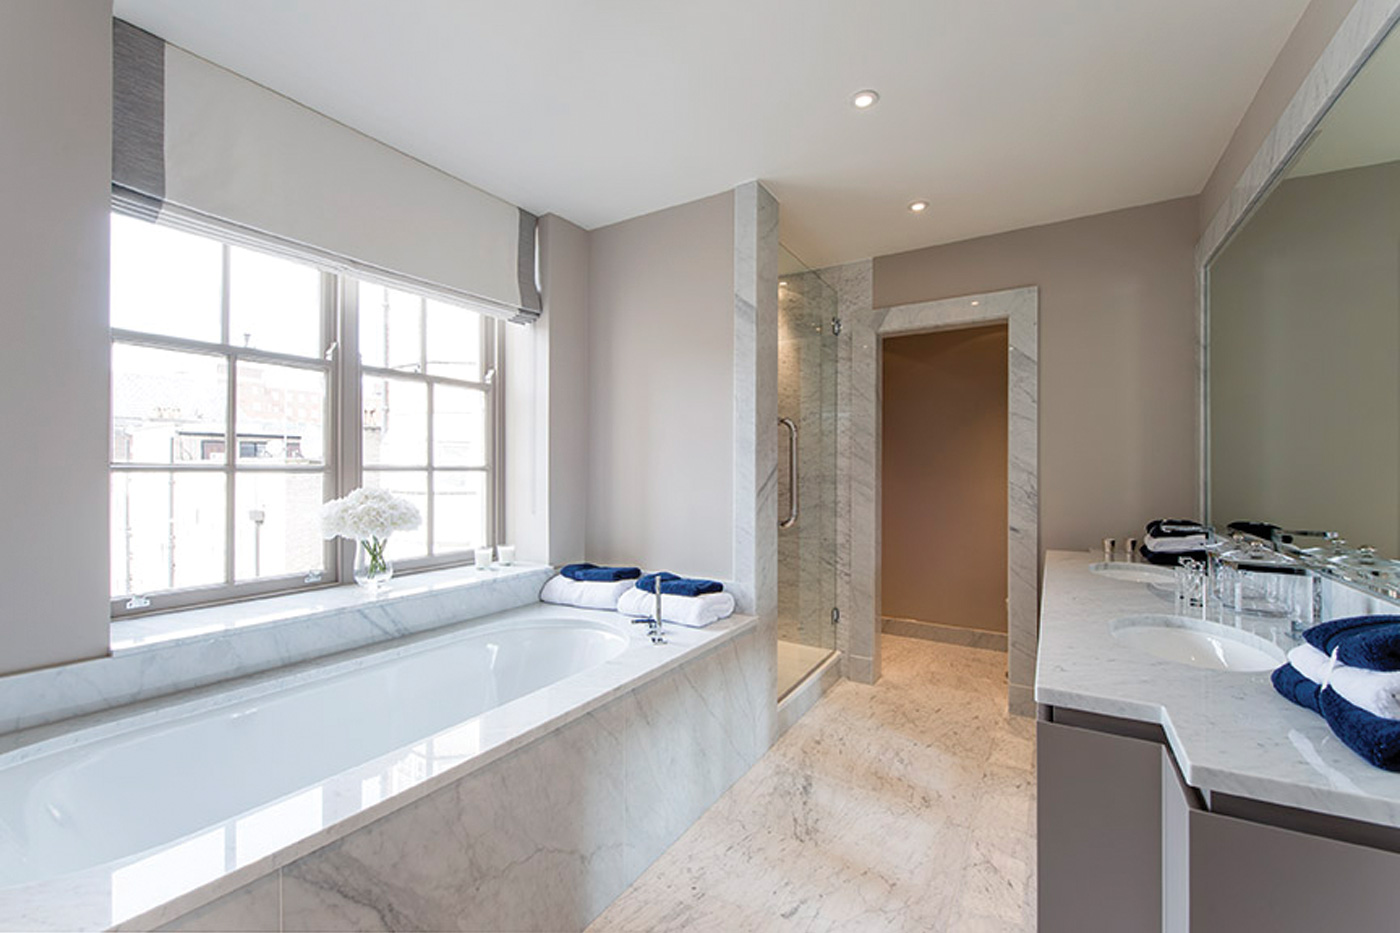 Marcus Cooper Group - 50 South Audley Street - Bathroom